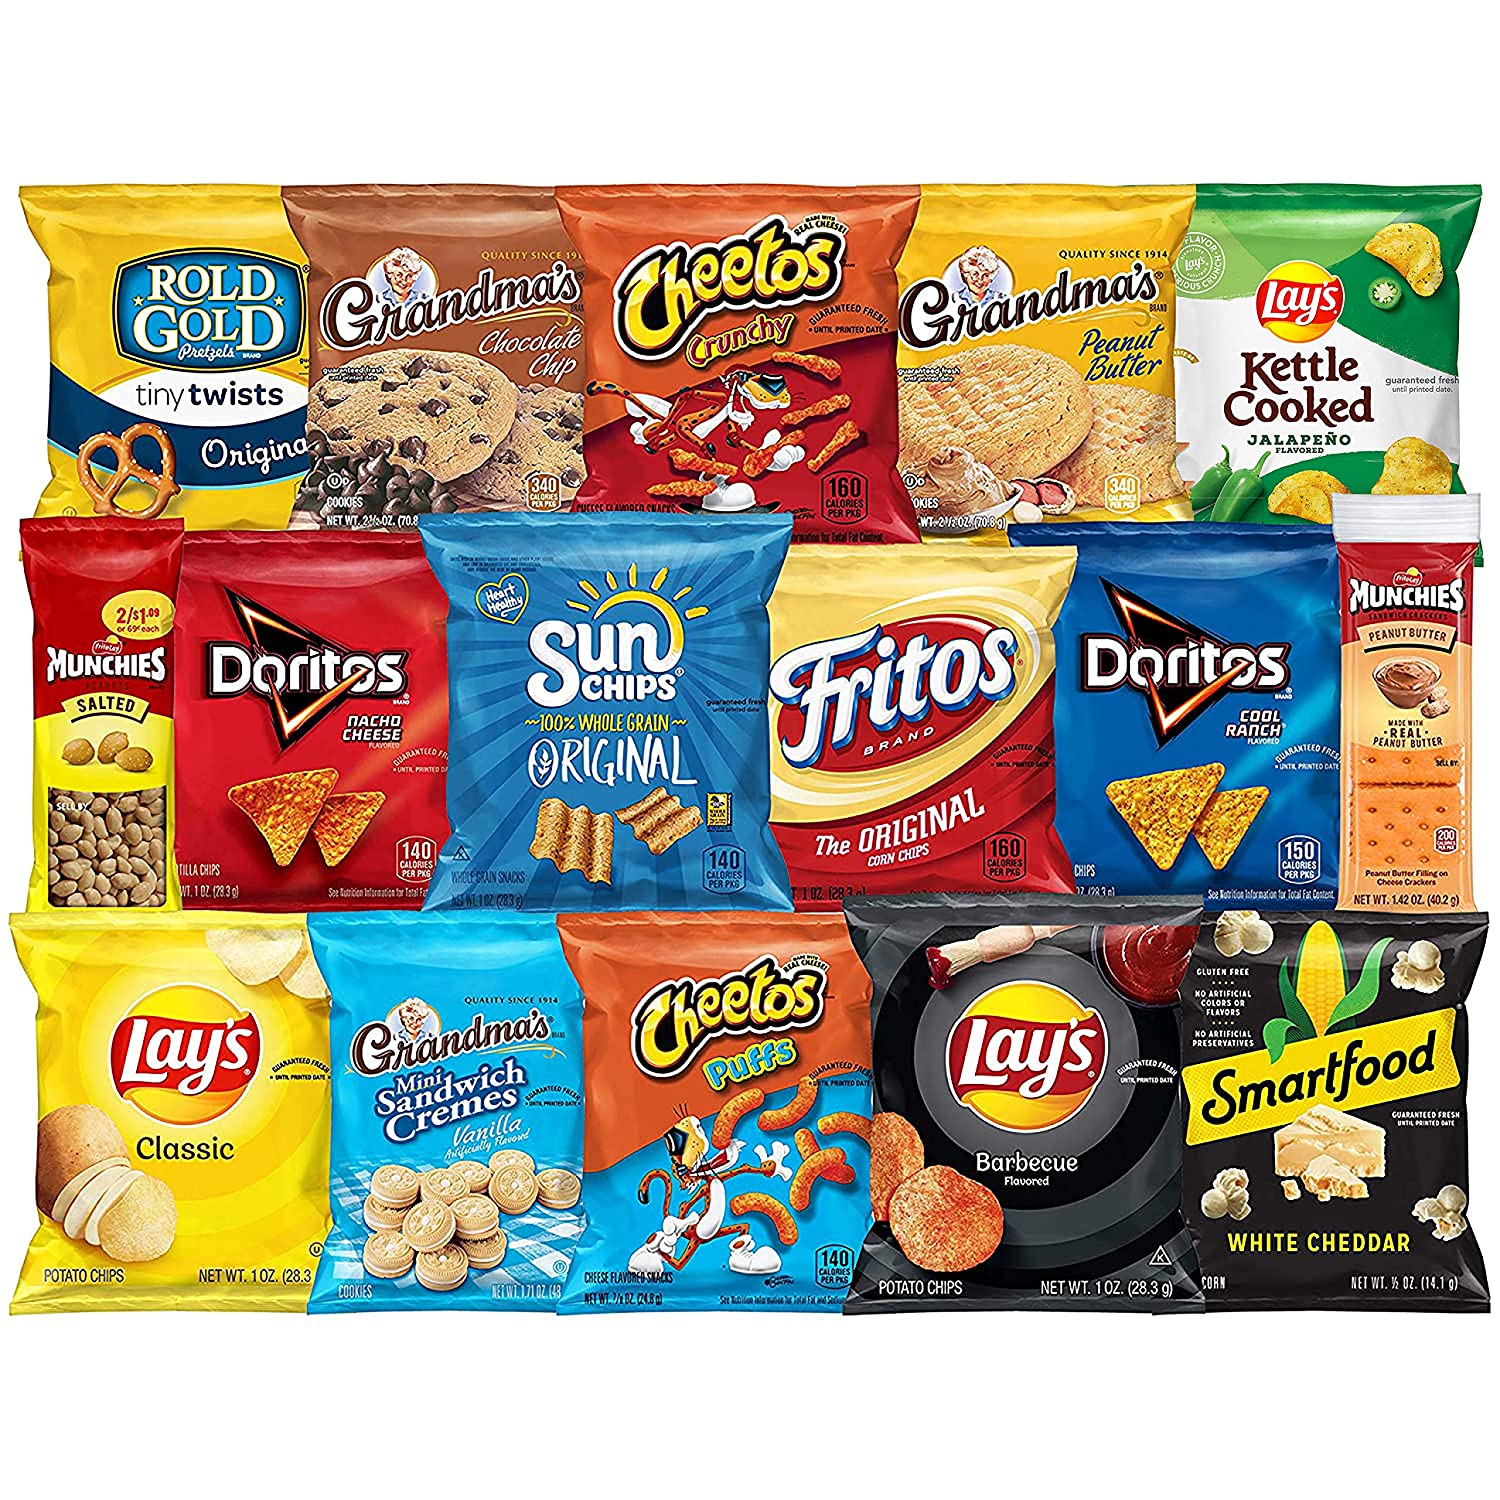 Amazon Up to 30% off Frito-Lay, Gatorade and MORE (Today Only)